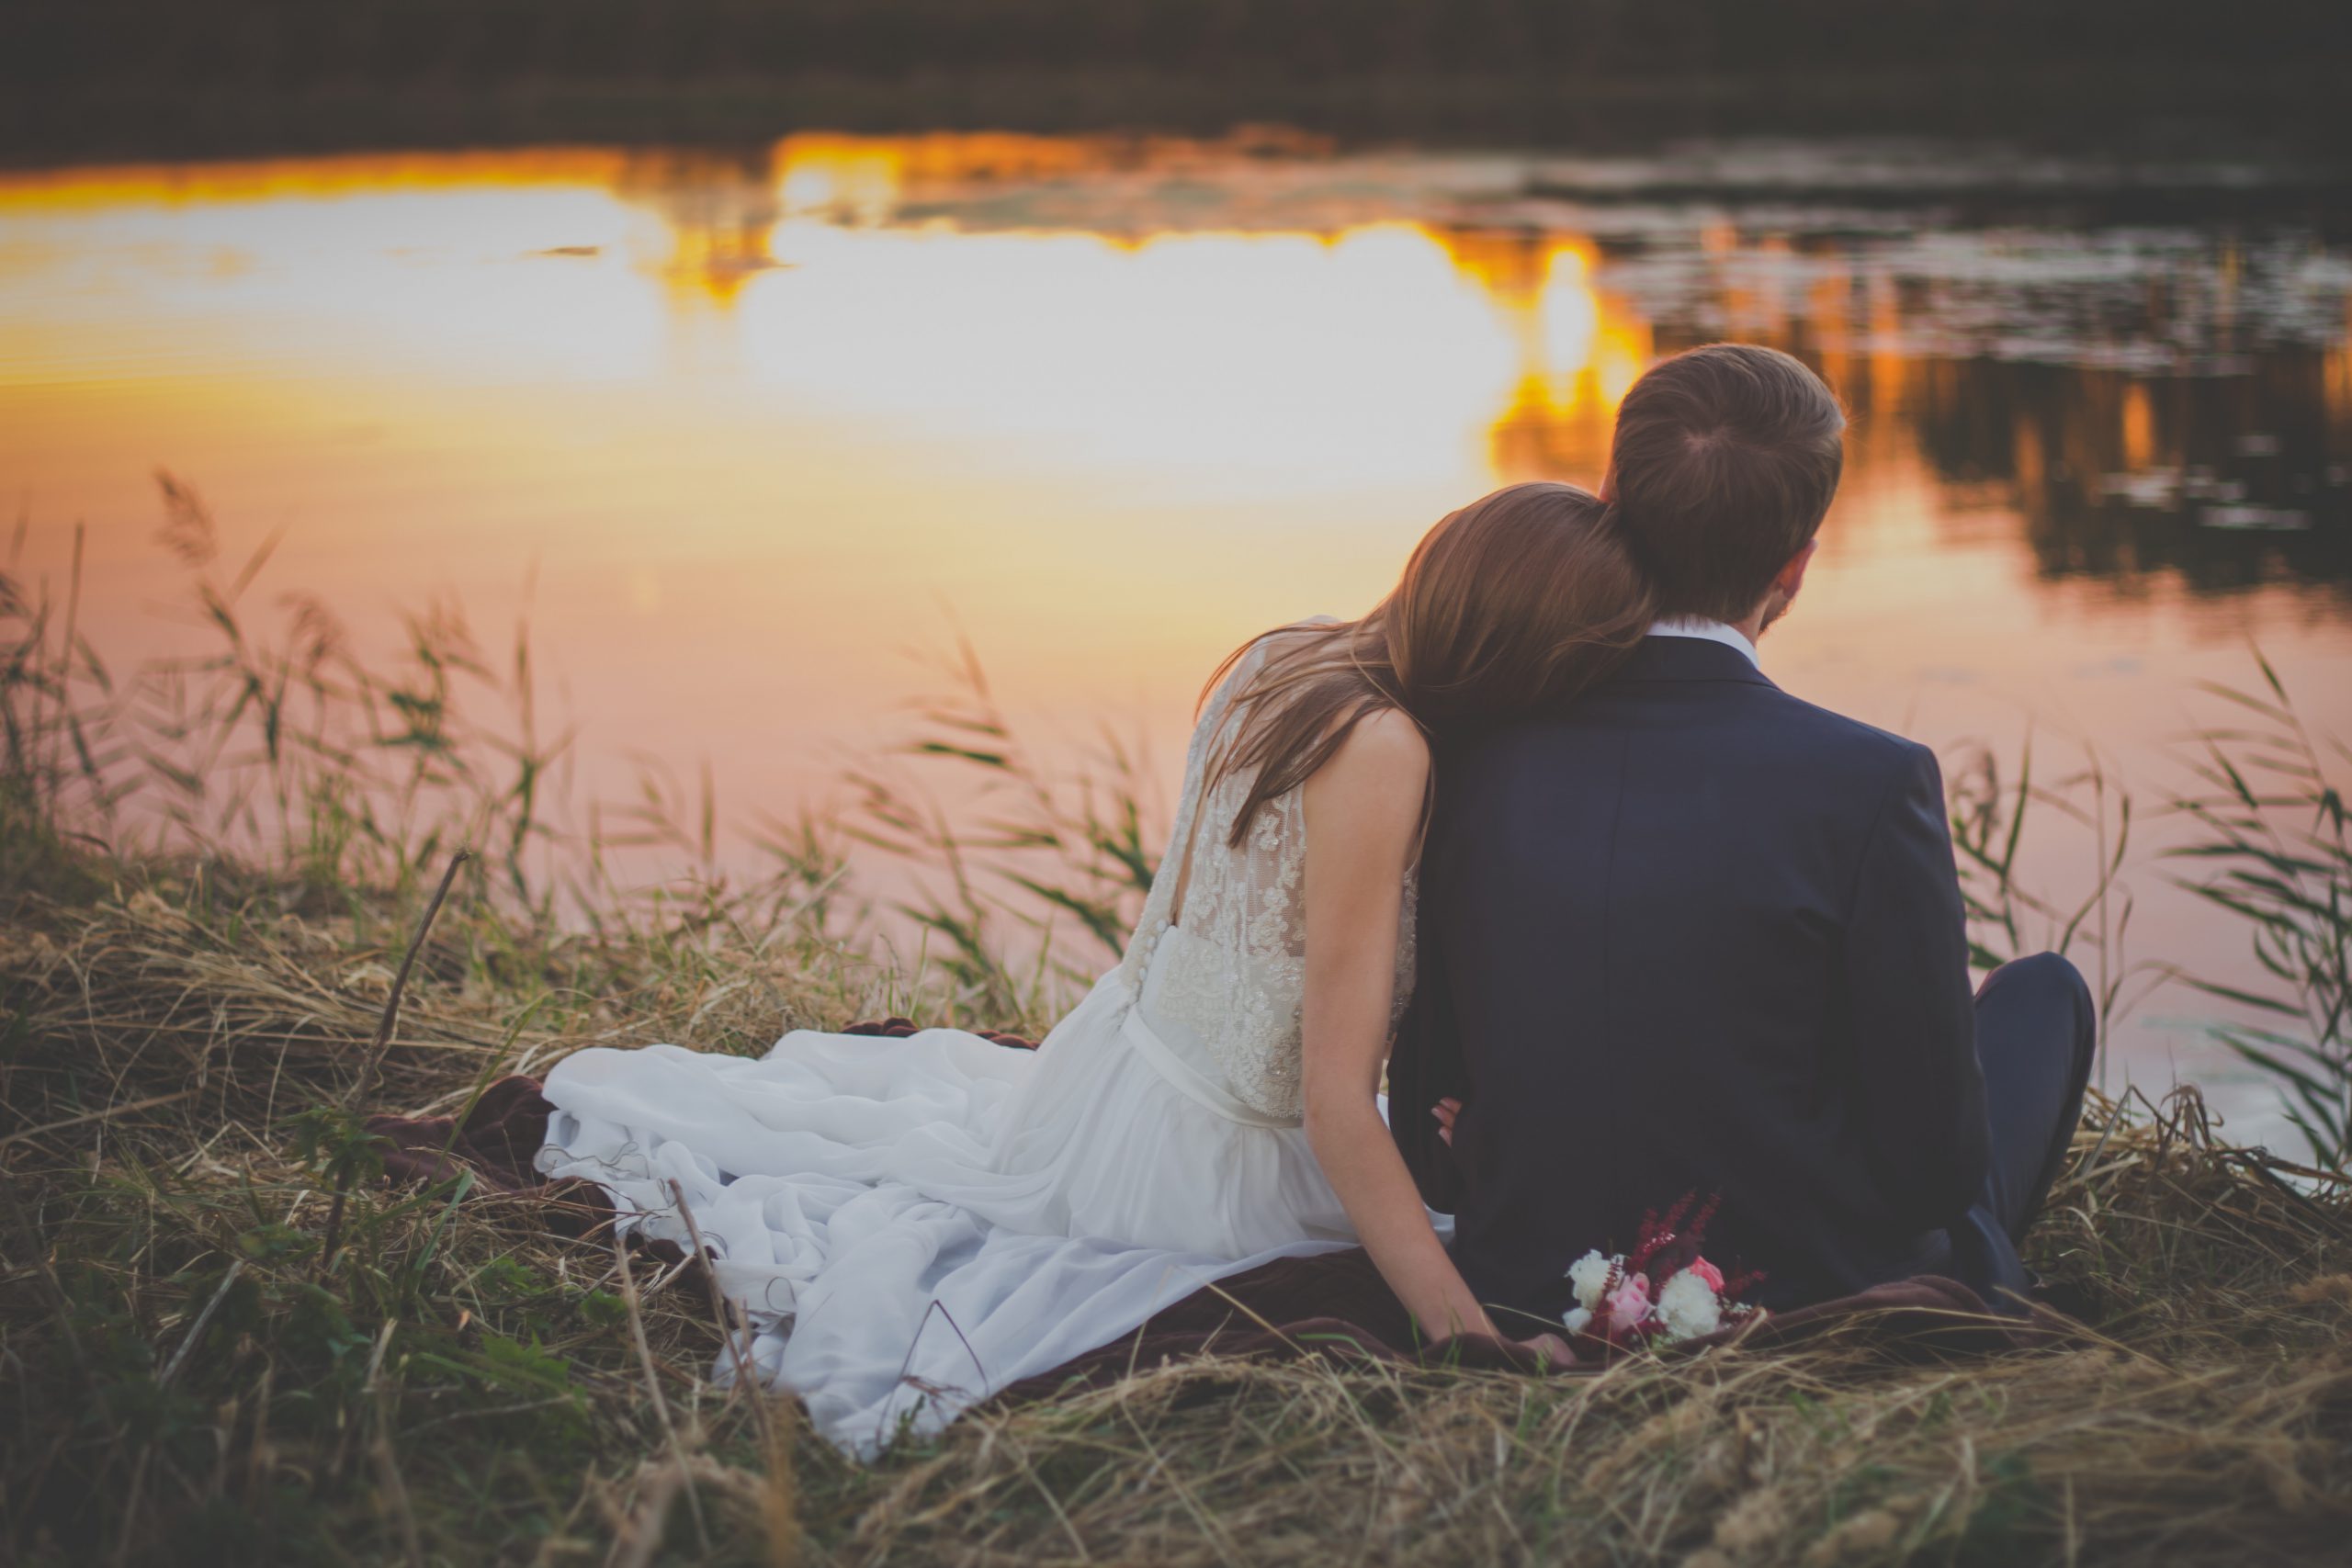 For the Church 7 Ways to Increase Intimacy in Your Marriage